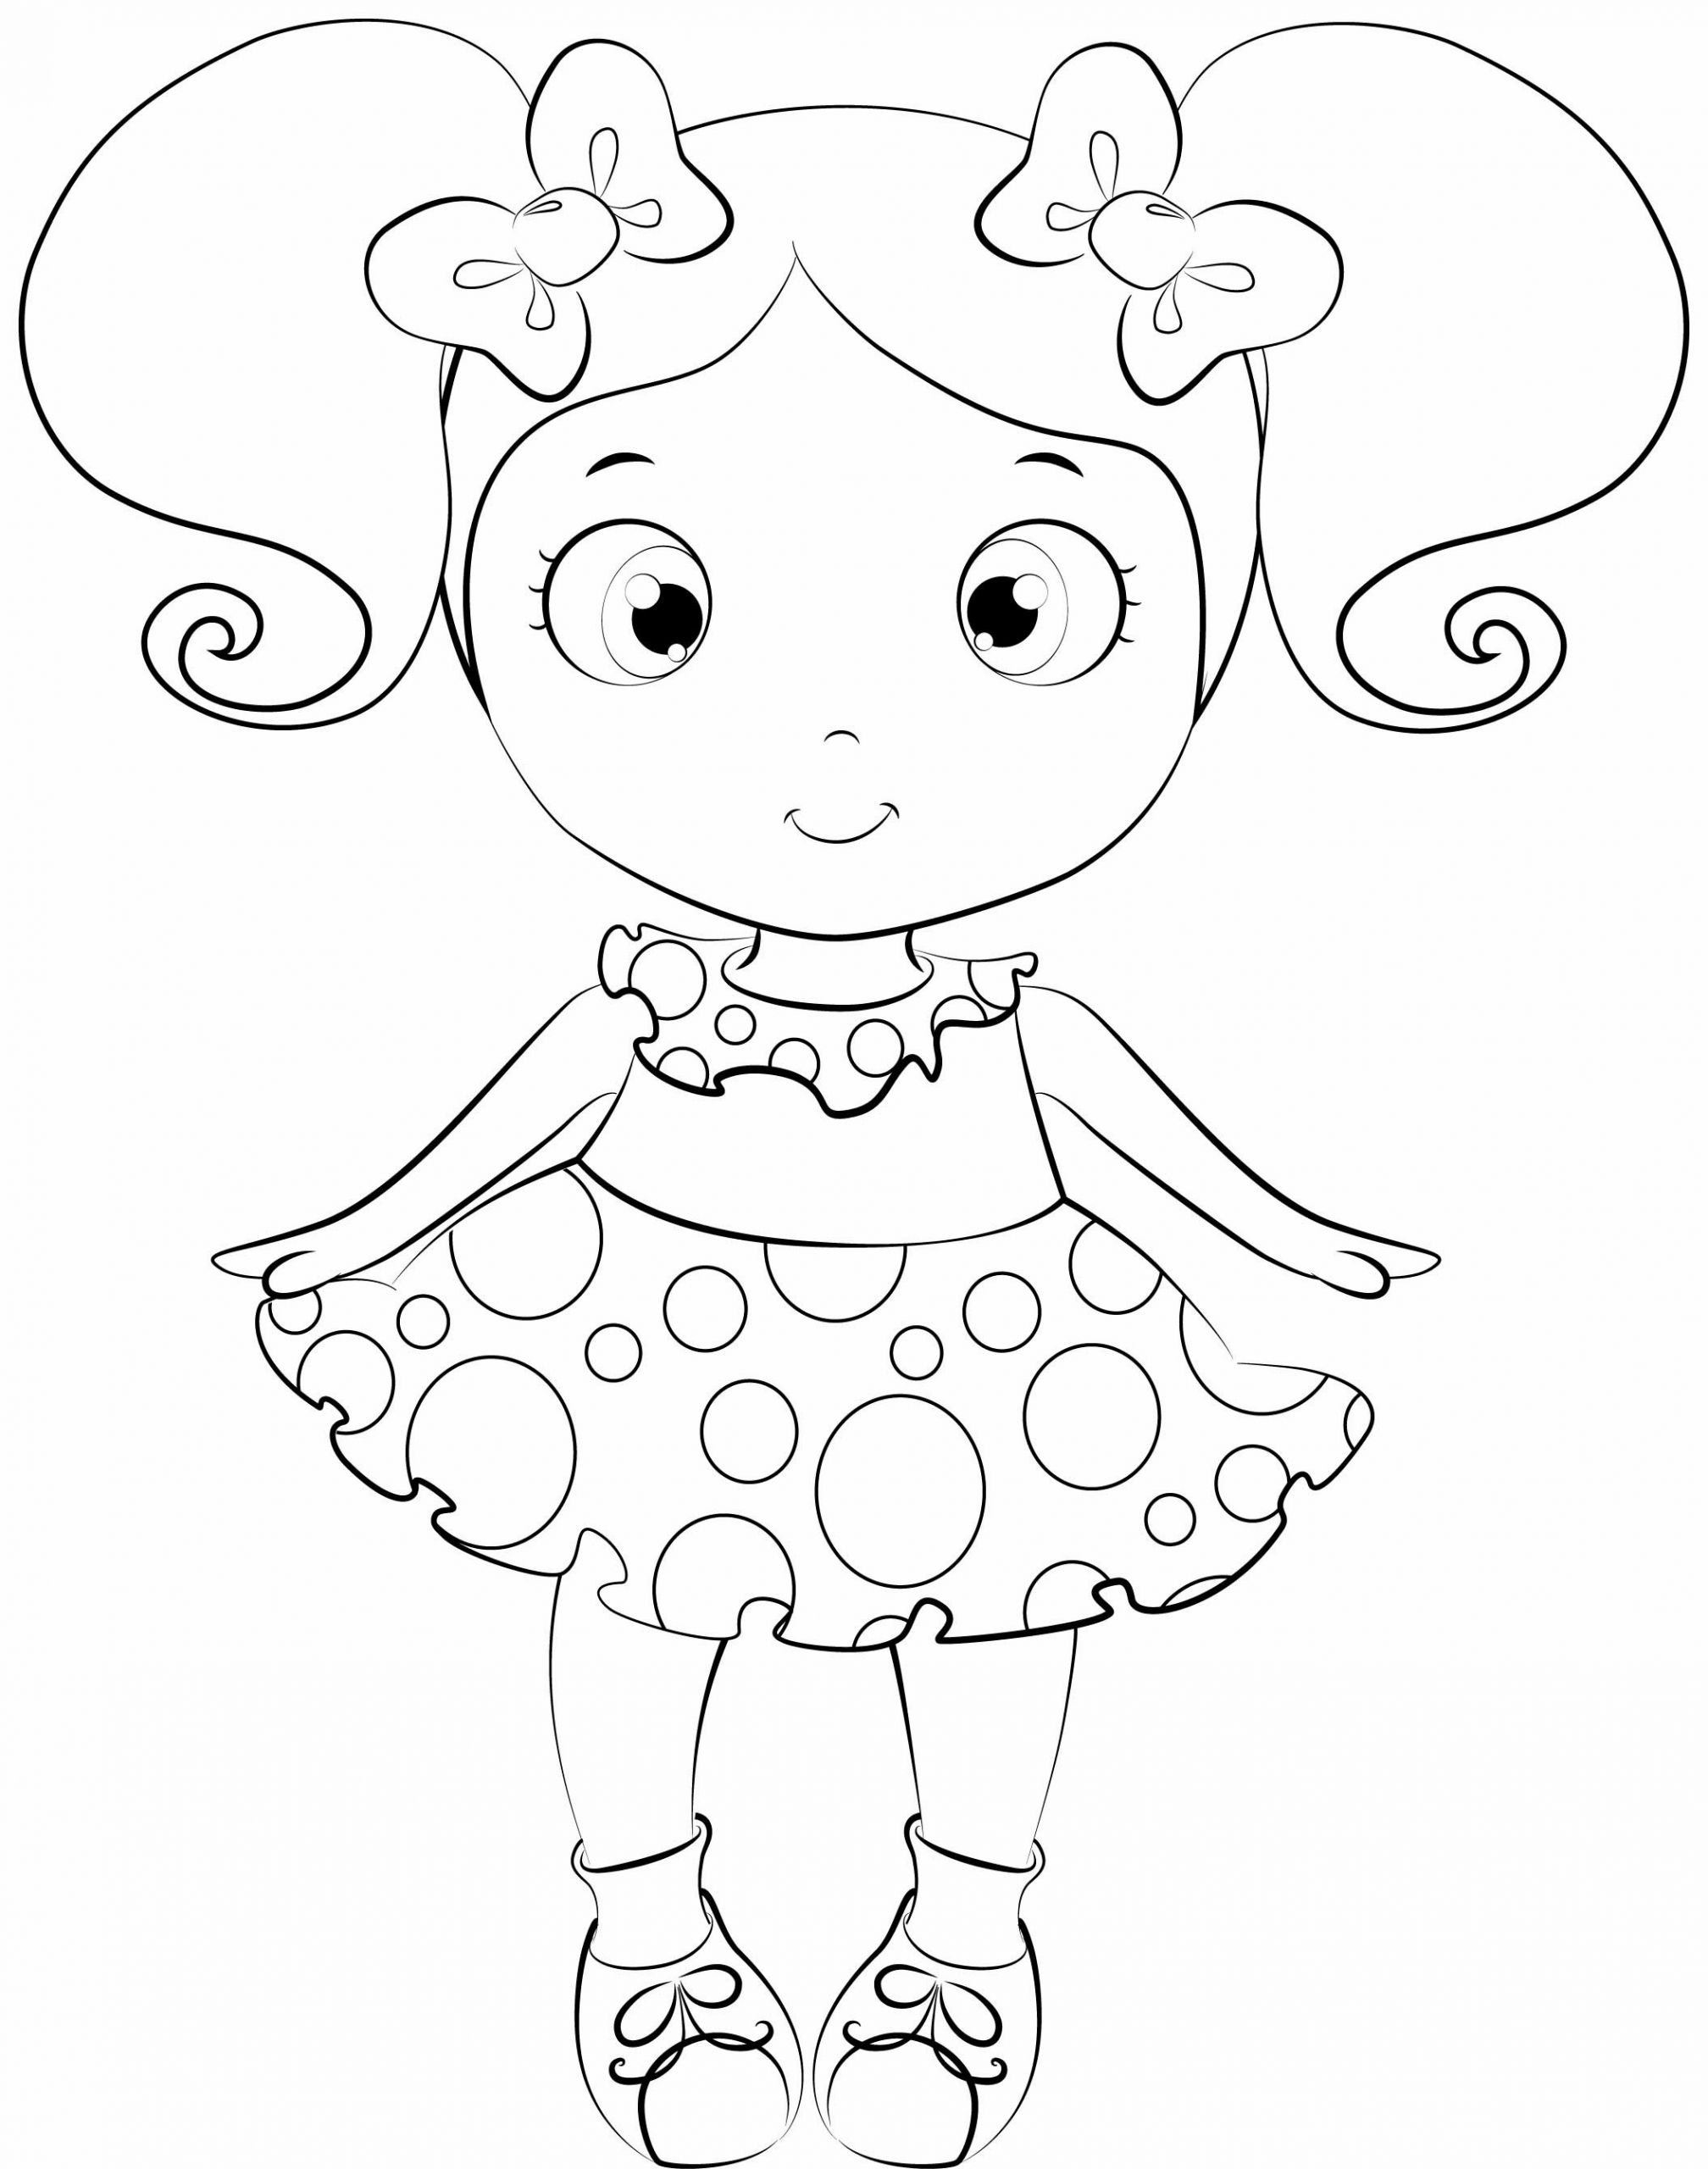 The 21 Best Ideas for Baby Alive Coloring Pages - Home, Family, Style